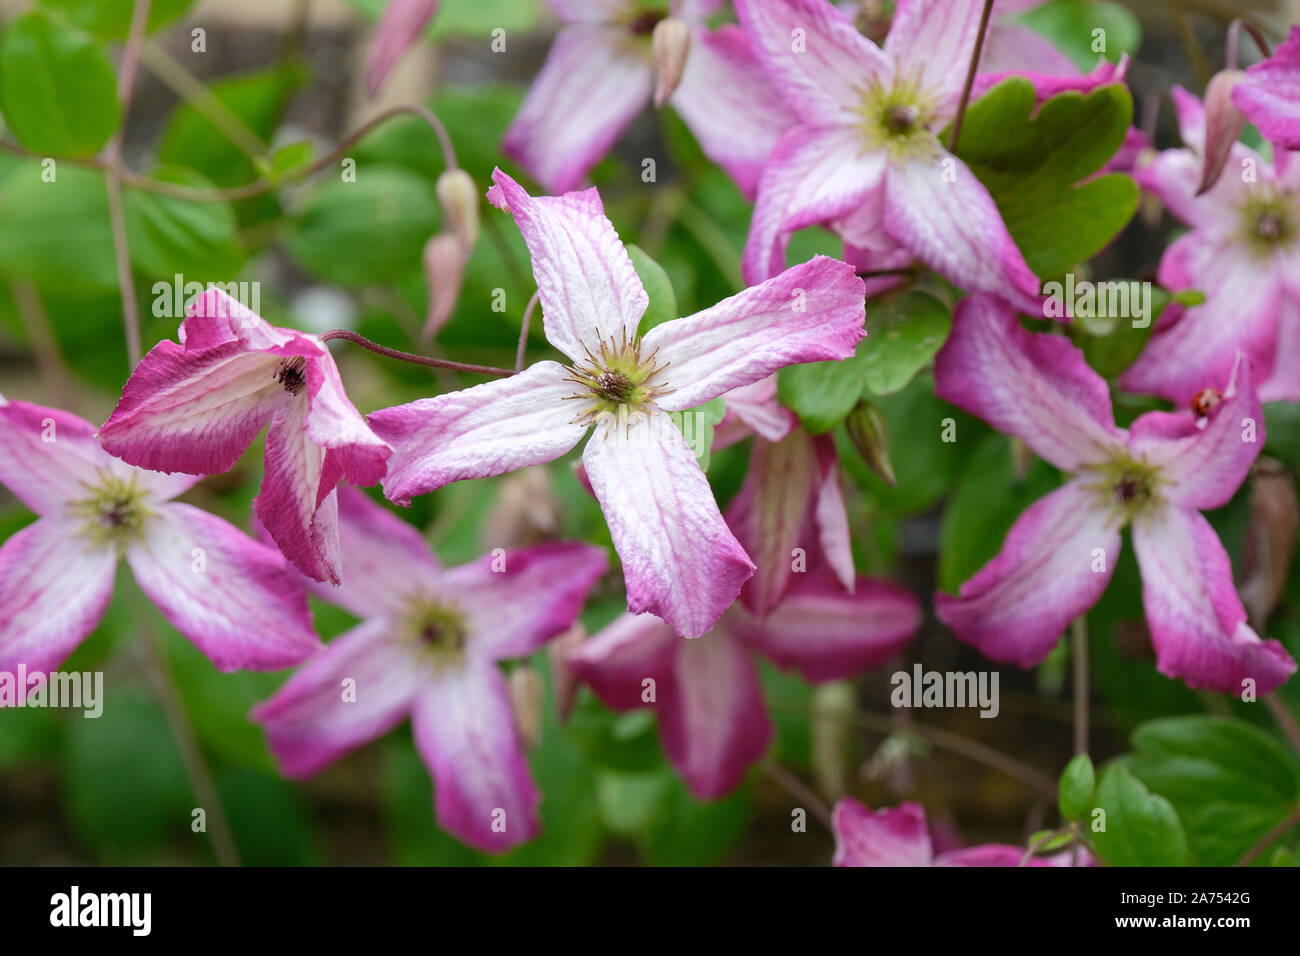 Purple-pink flowers of clematis viticella minuet. Stock Photo